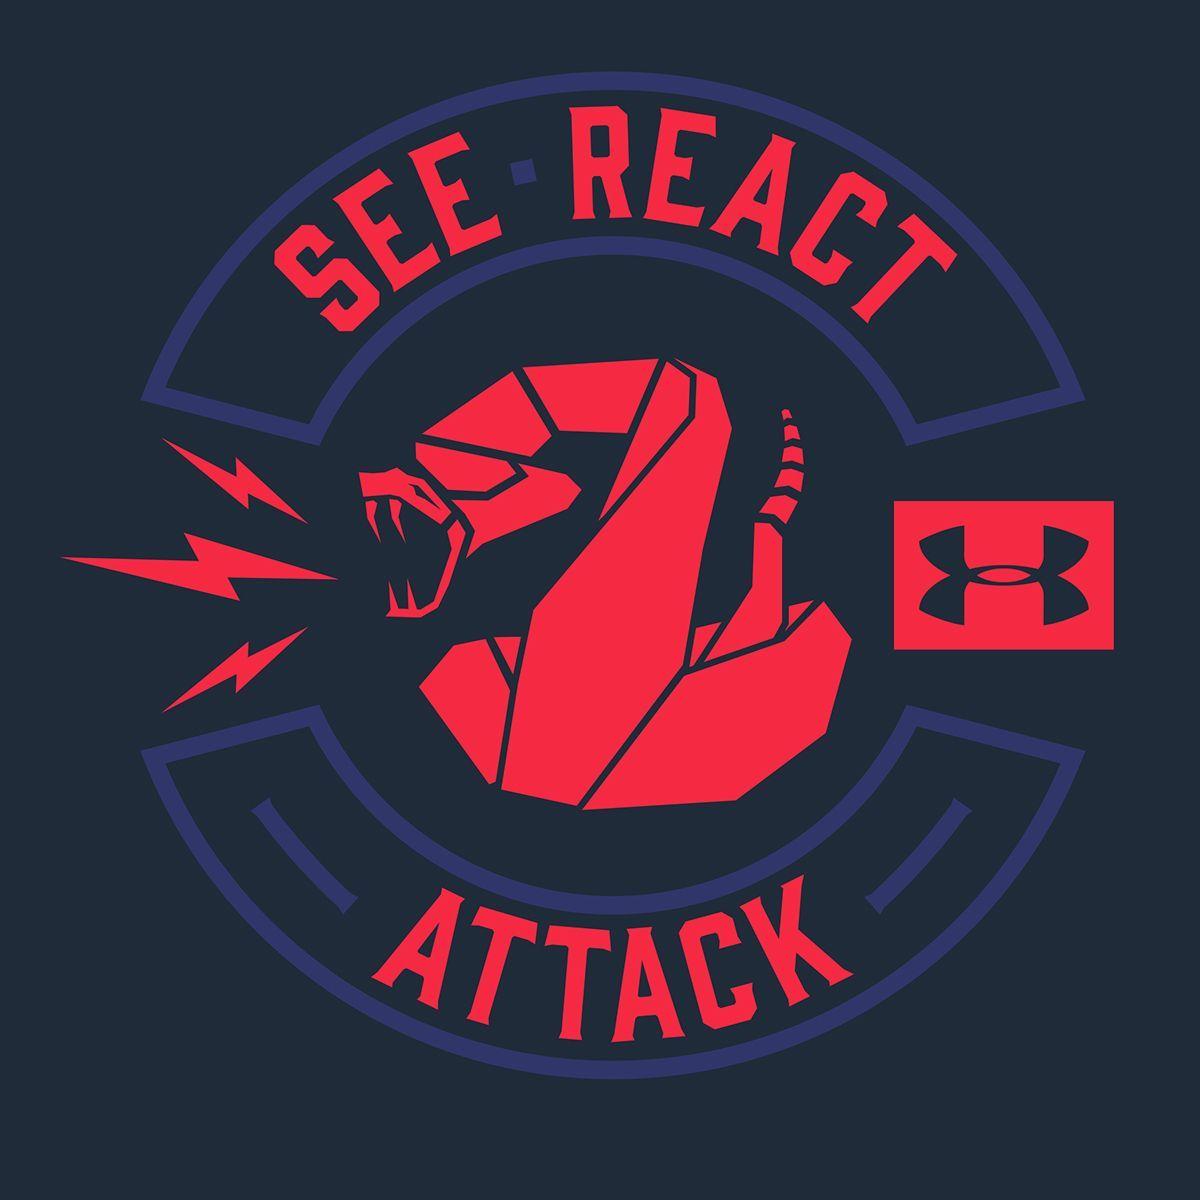 Cool Red and Blue Under Armour Logo - Under Armour T-shirt SEE, REACT, ATTACK on Behance | Logos ...